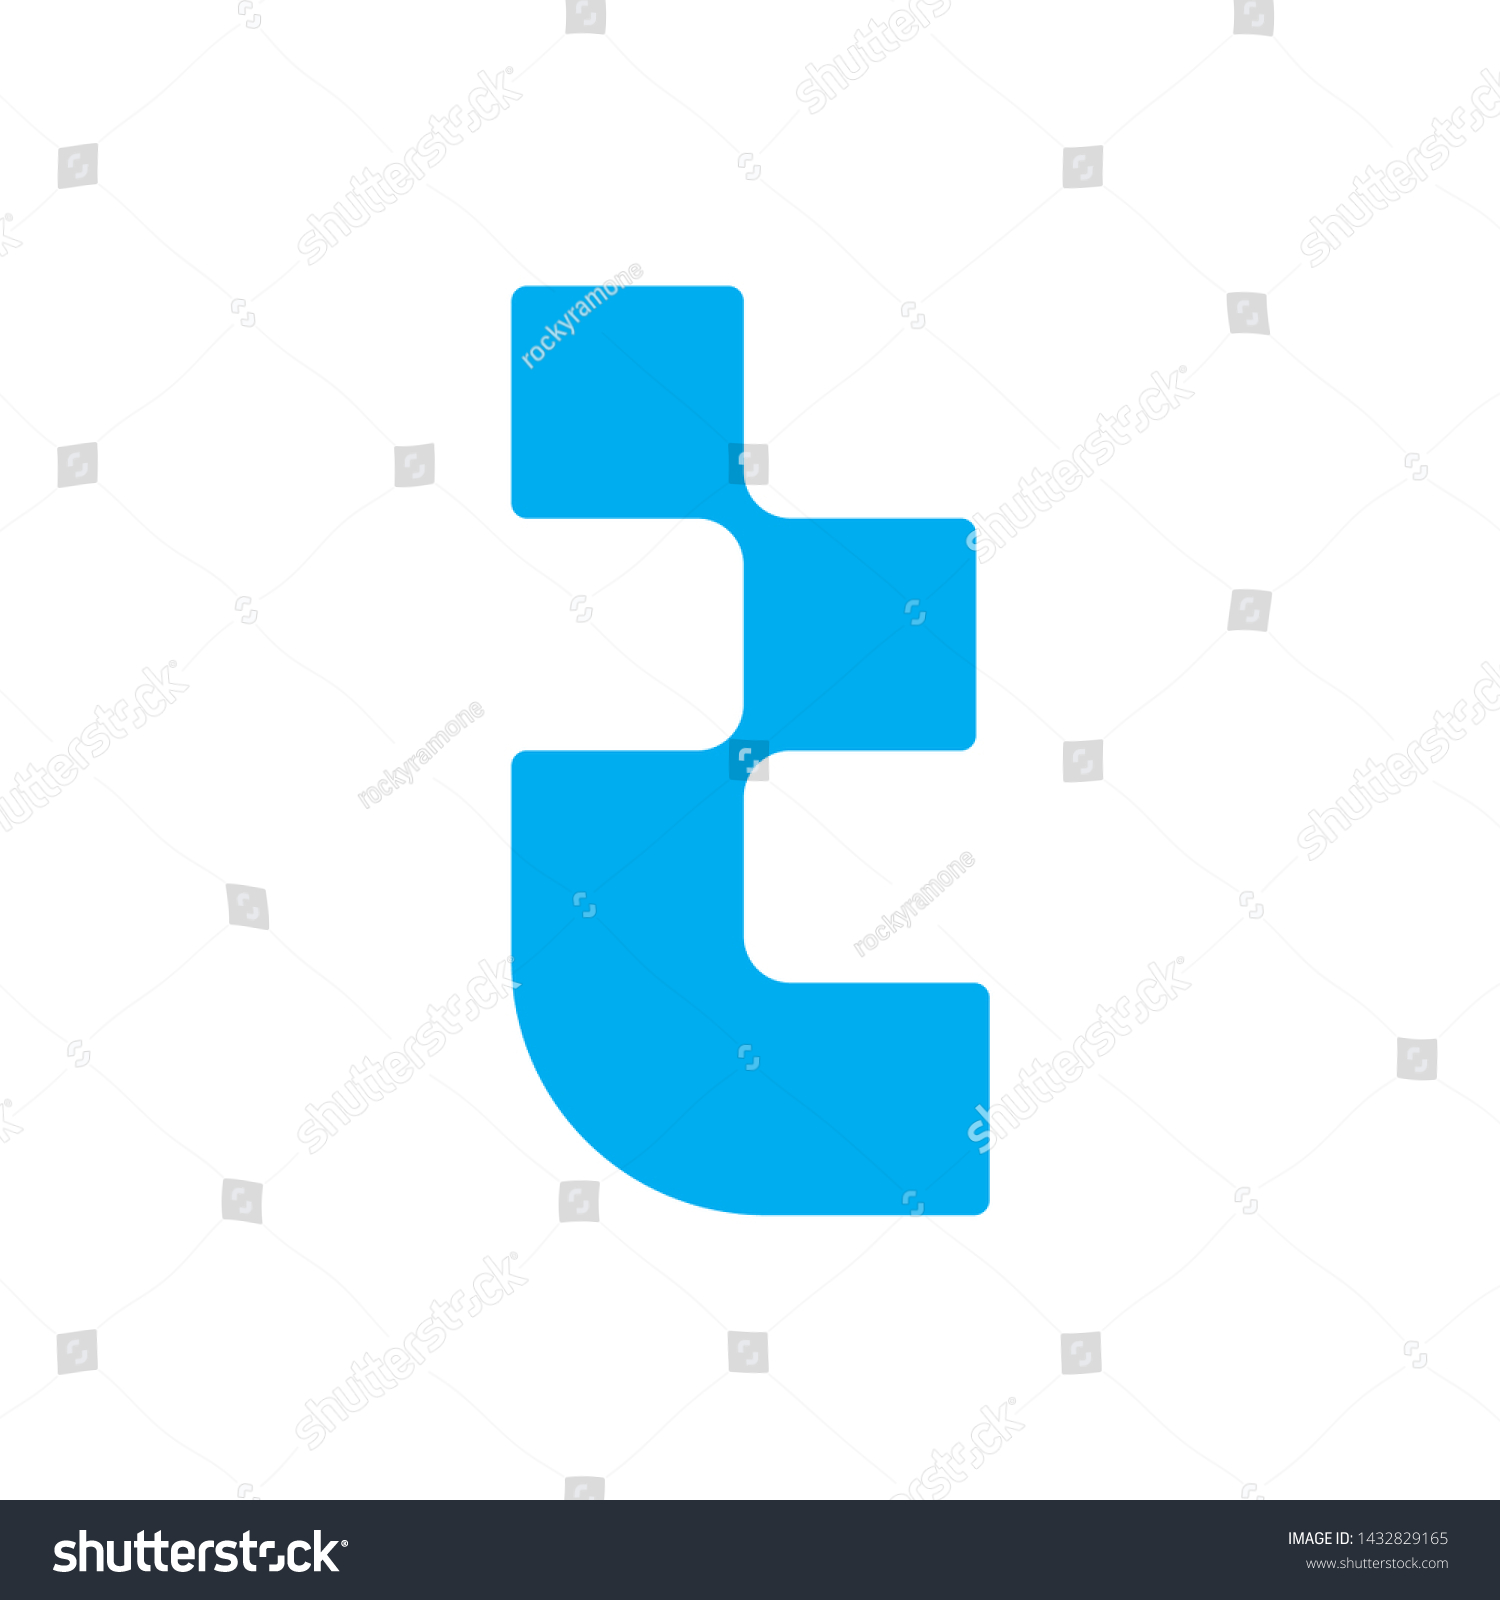 Monogram Letter T Square Pixel Business Stock Vector (Royalty Free ...